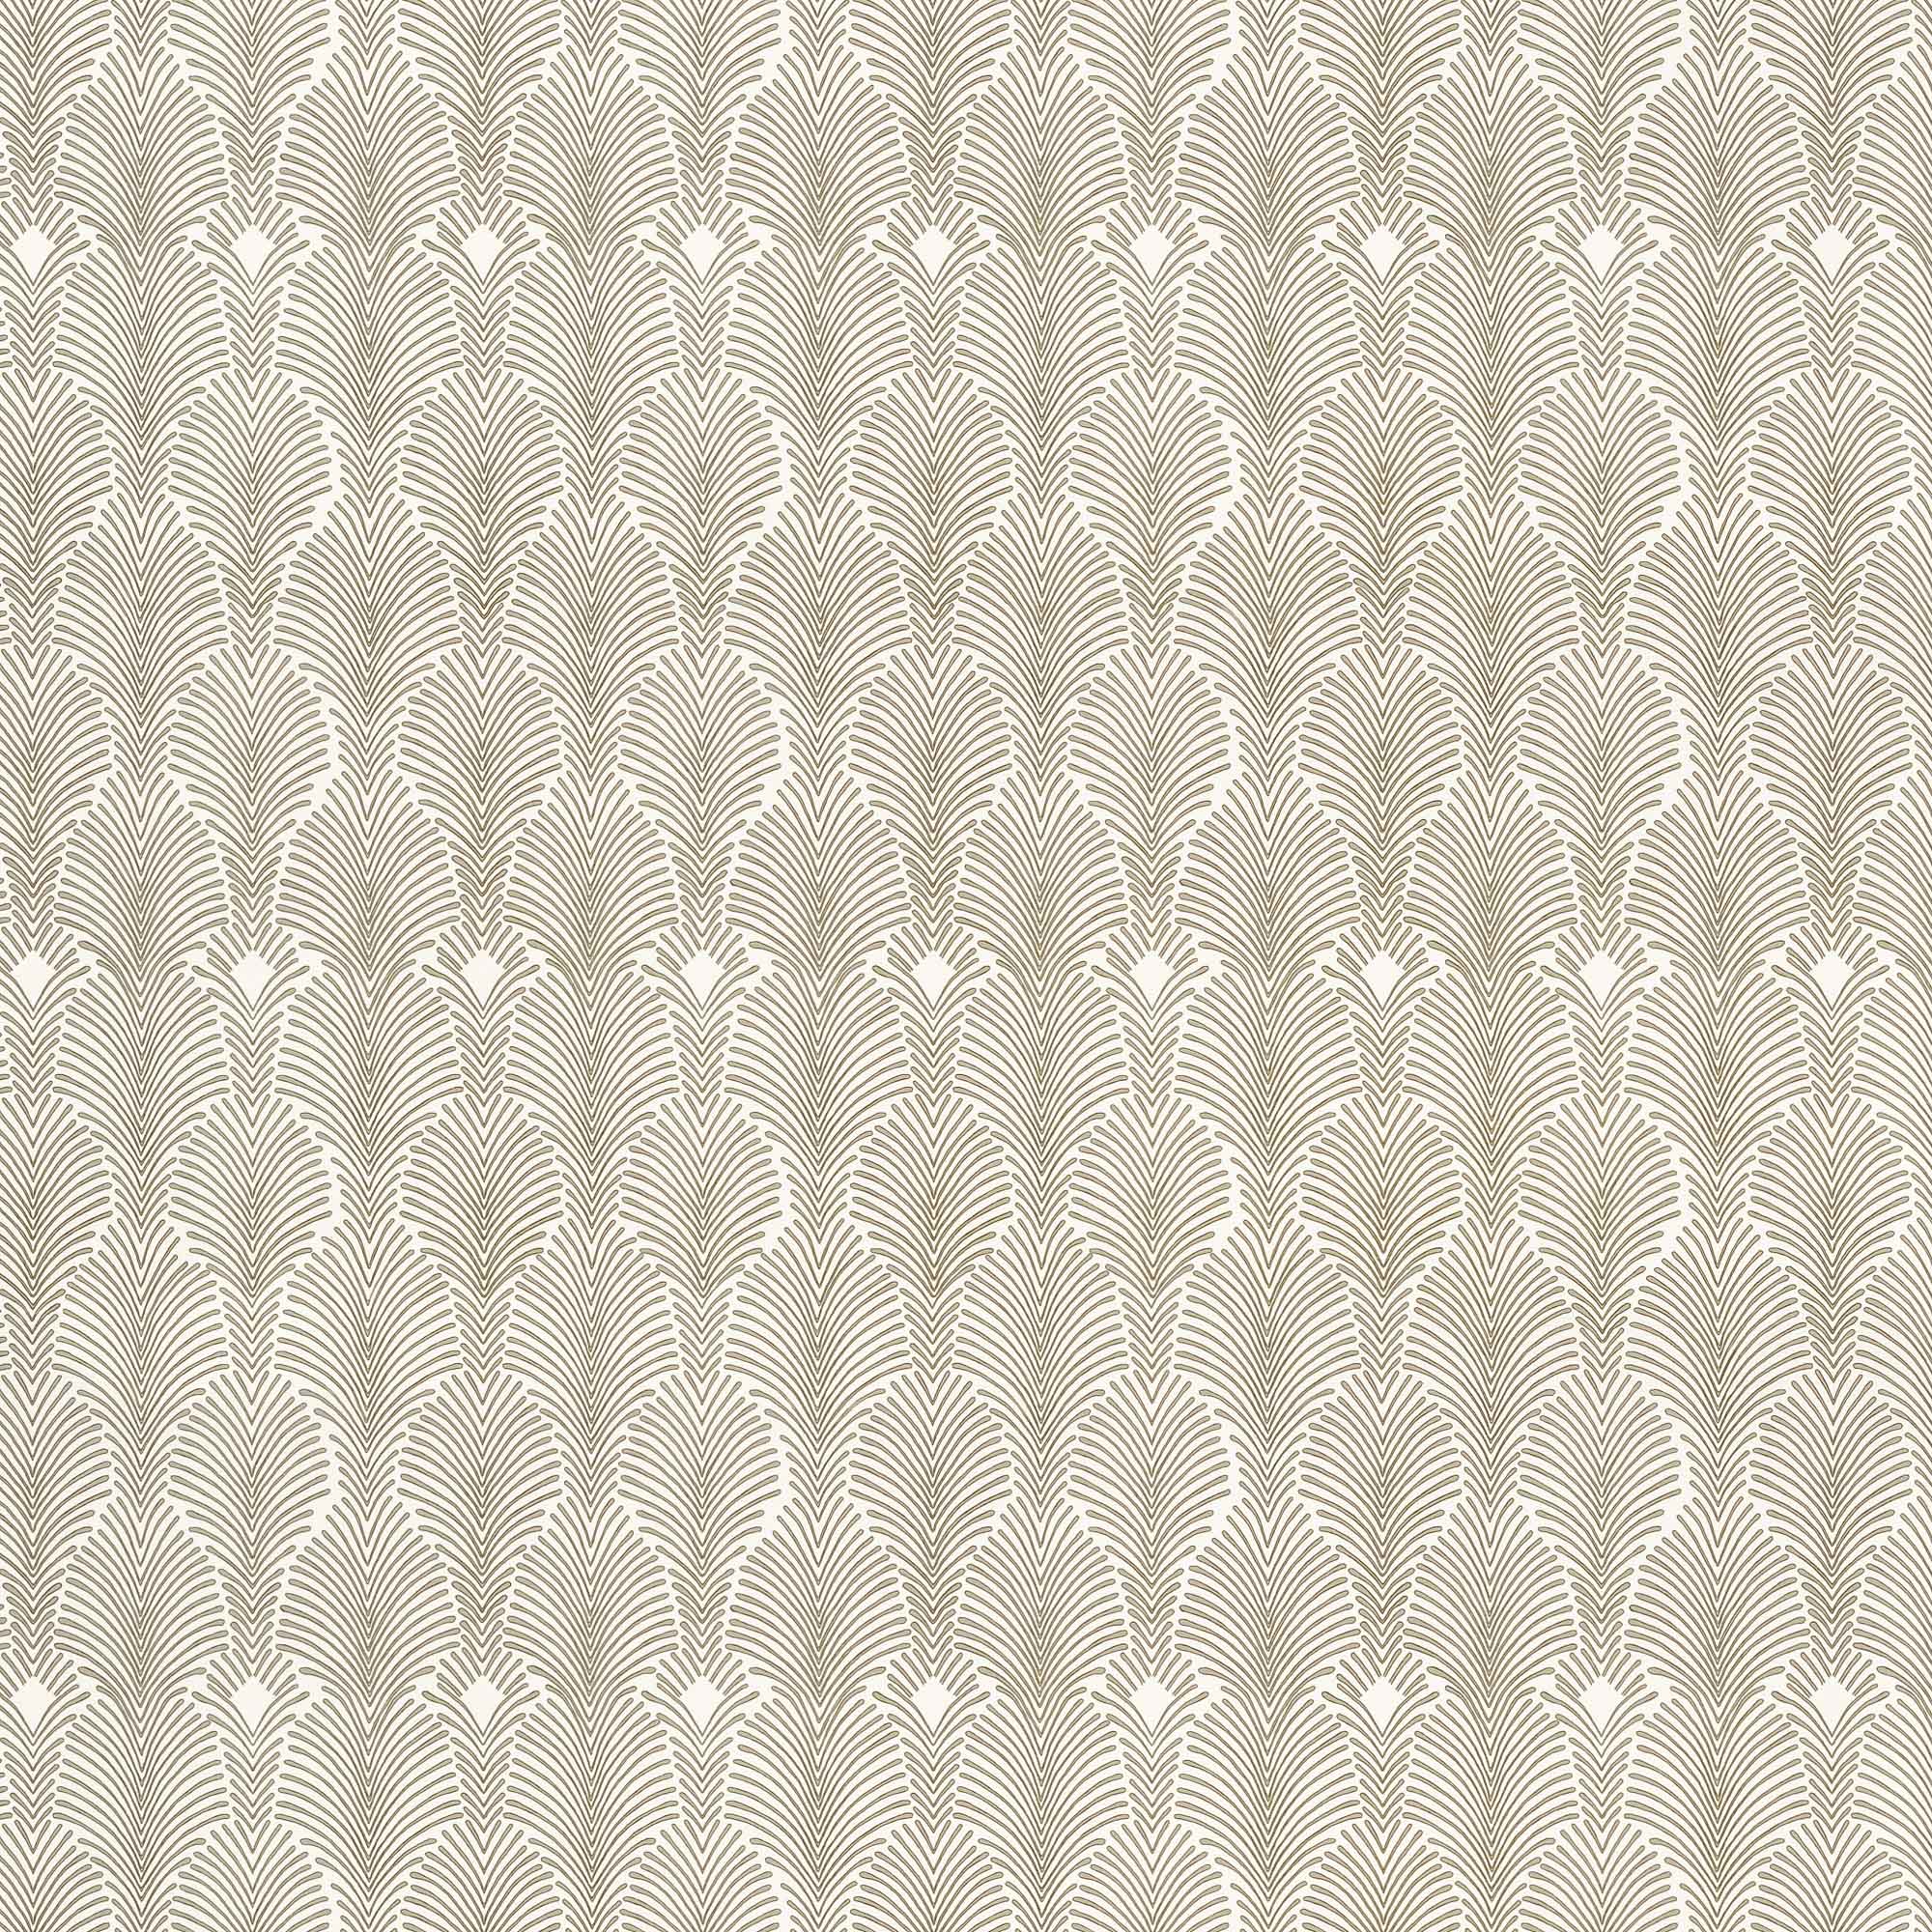 Detail of fabric in a striped damask pattern in olive on a cream field.